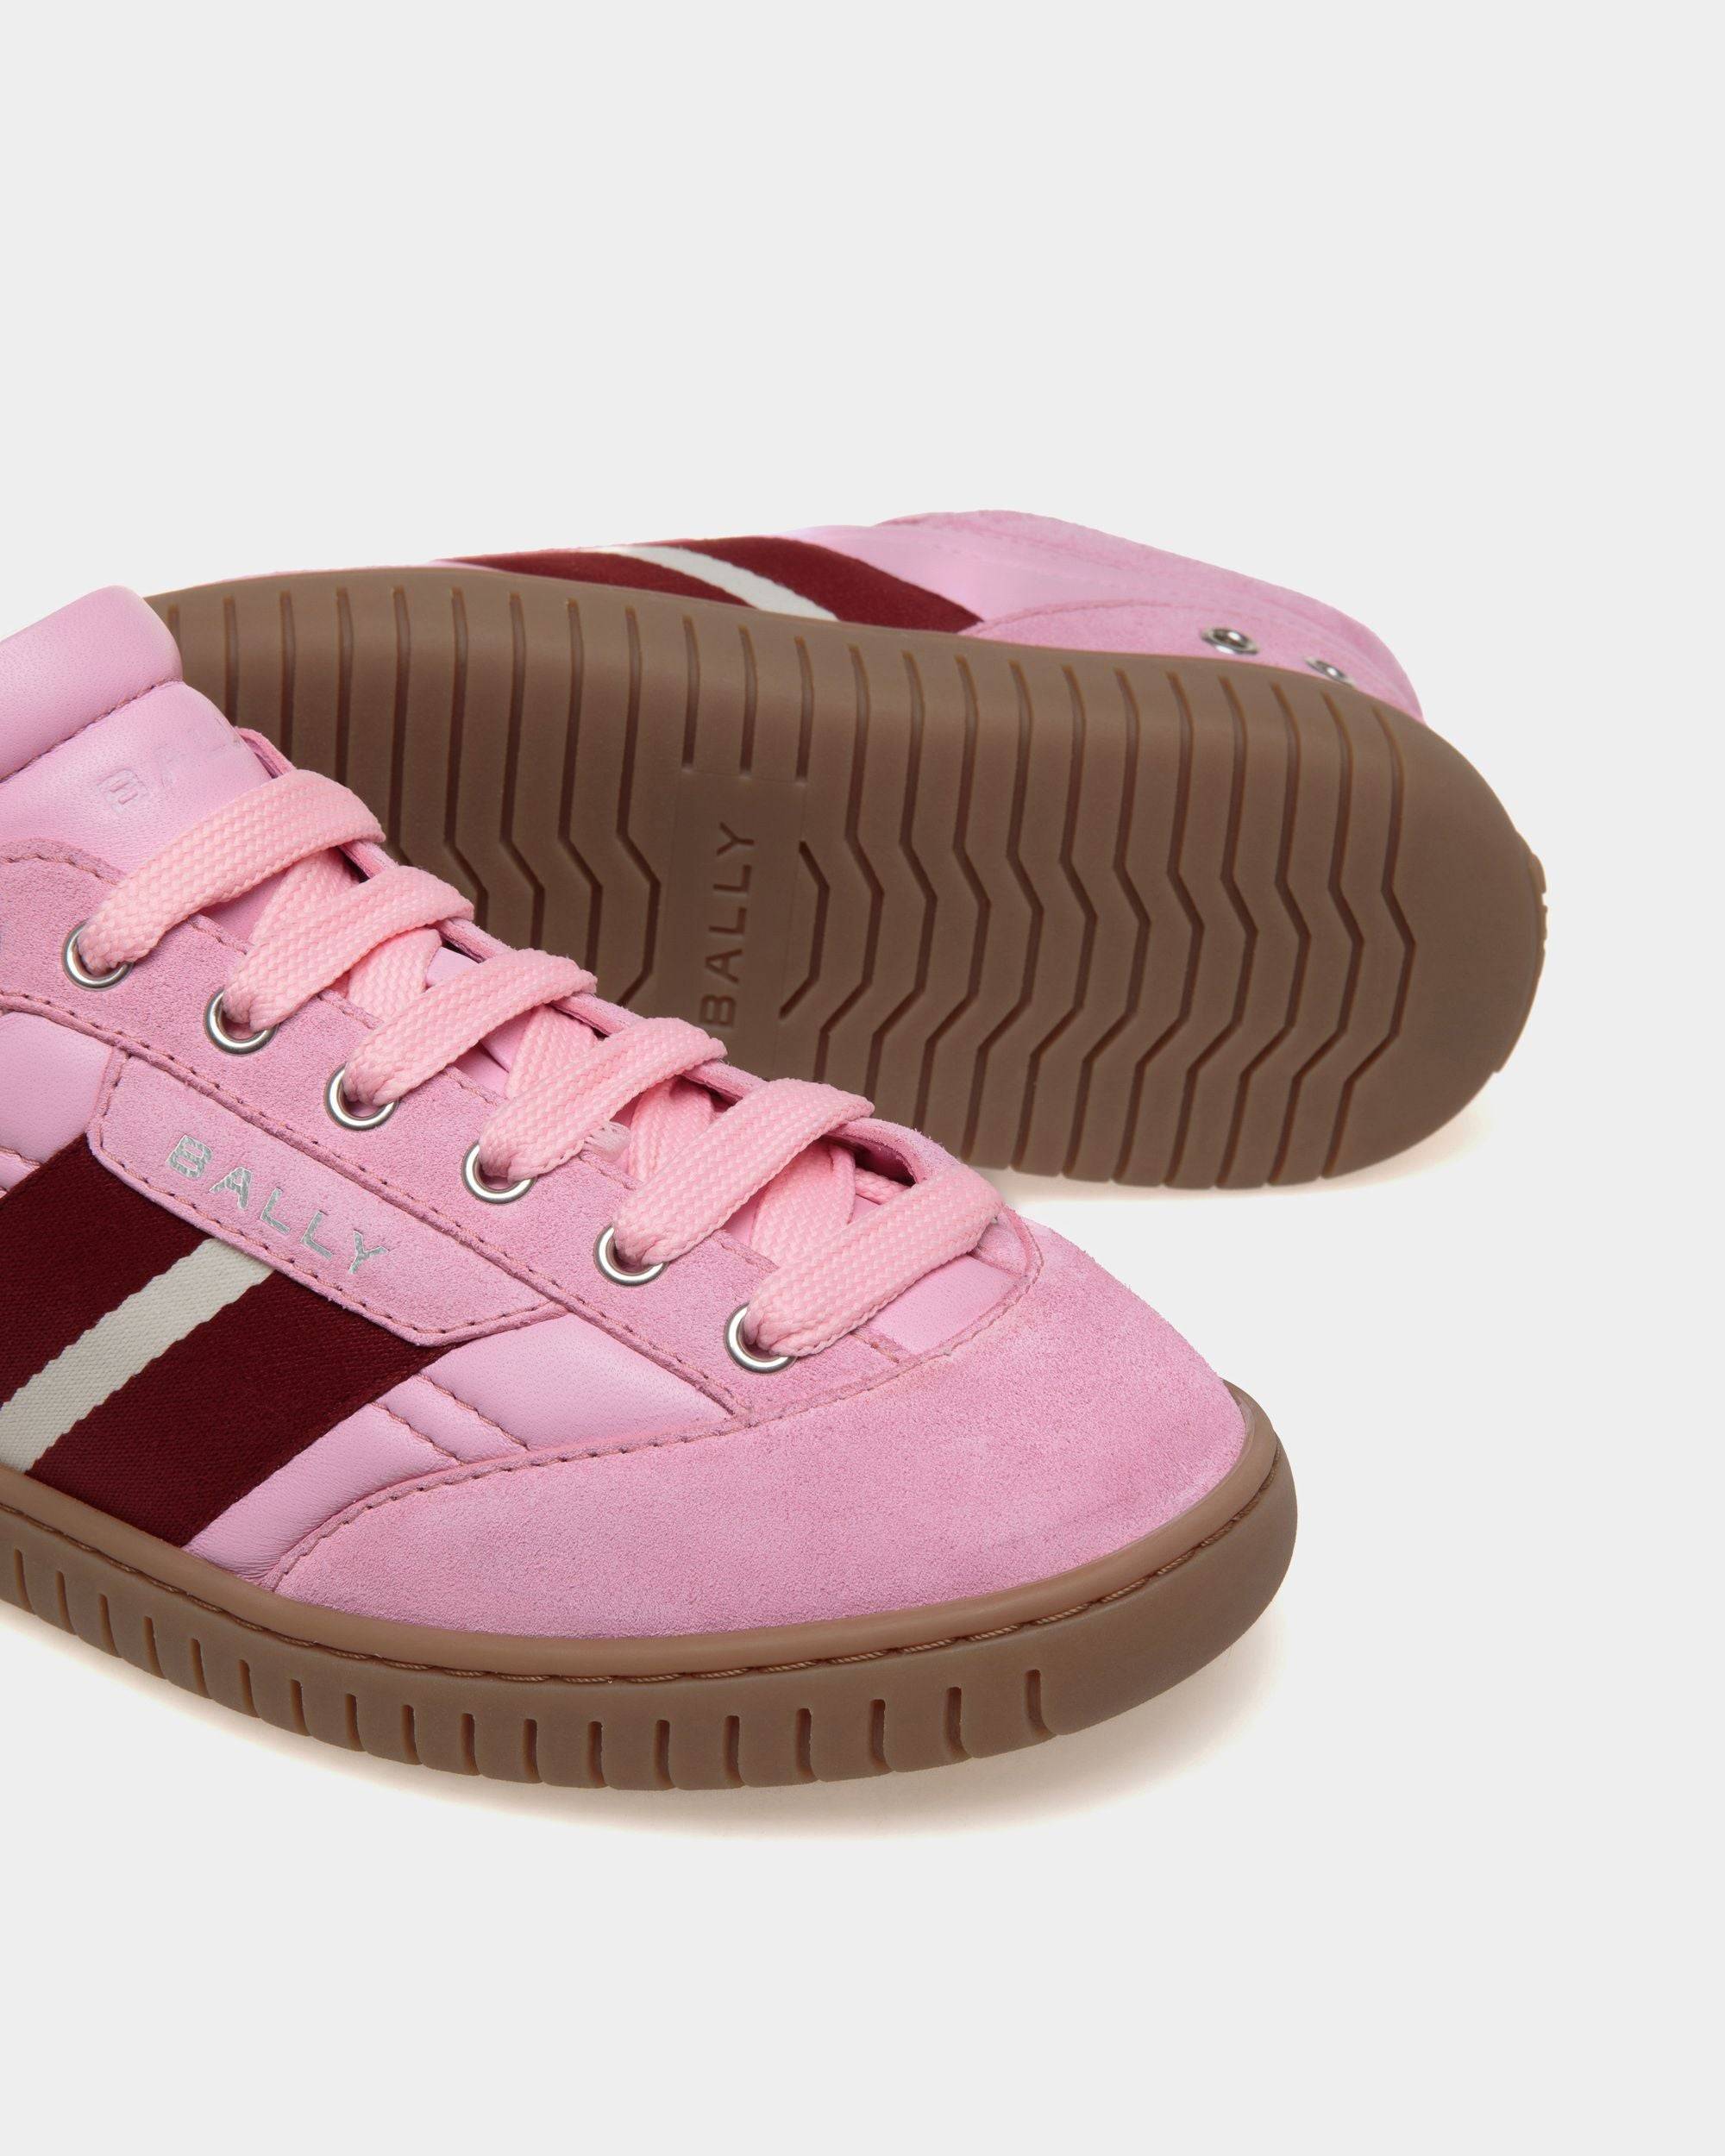 Player | Women's Sneaker in Pink Leather and Suede | Bally | Still Life Below